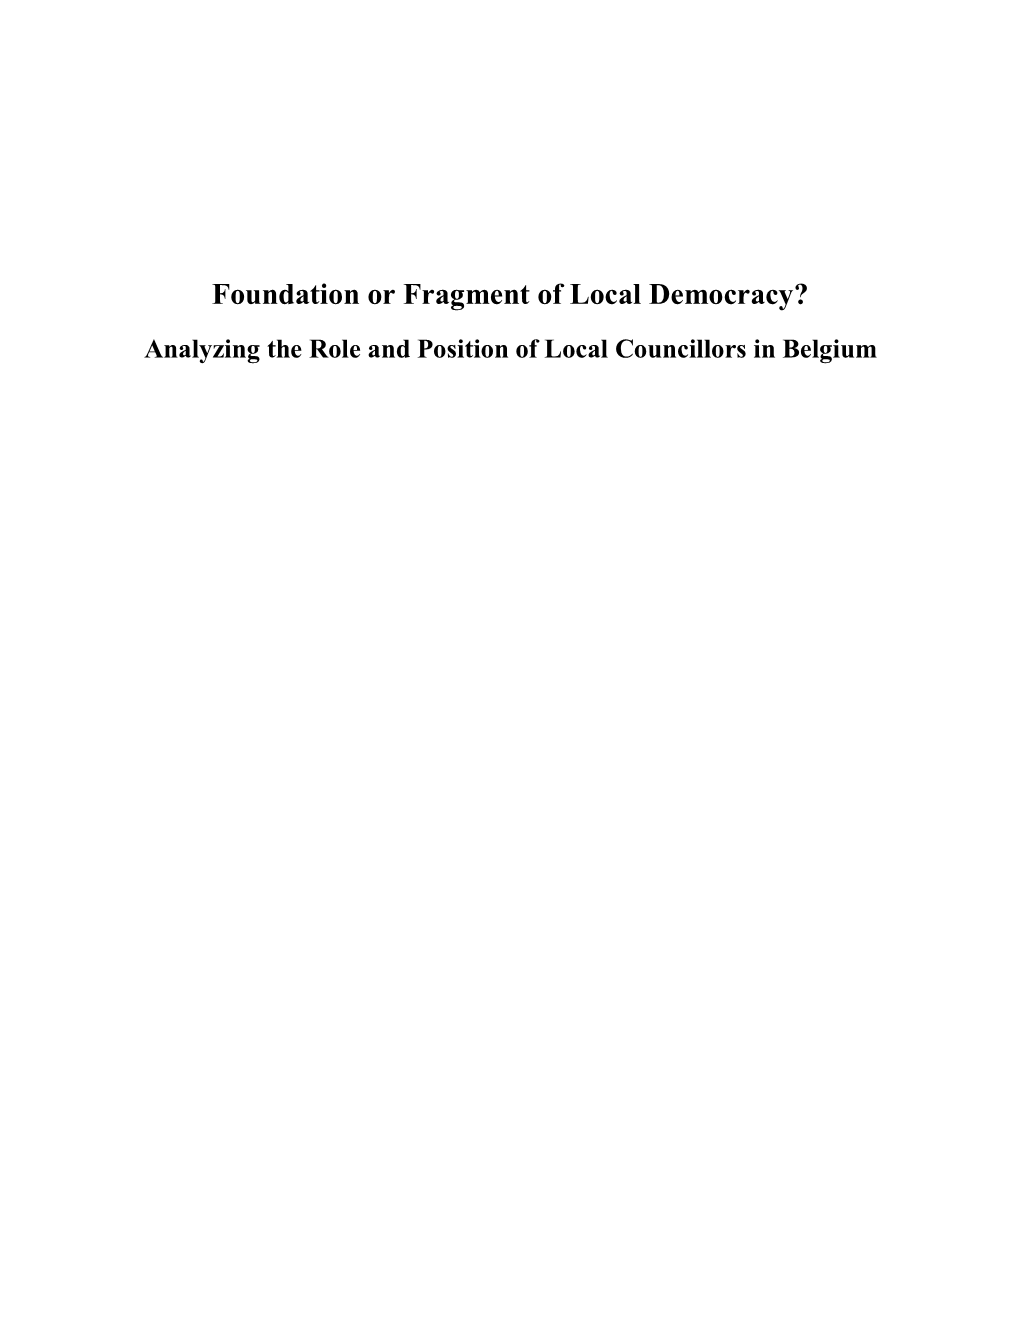 Foundation Or Fragment of Local Democracy? Analyzing the Role and Position of Local Councillors in Belgium